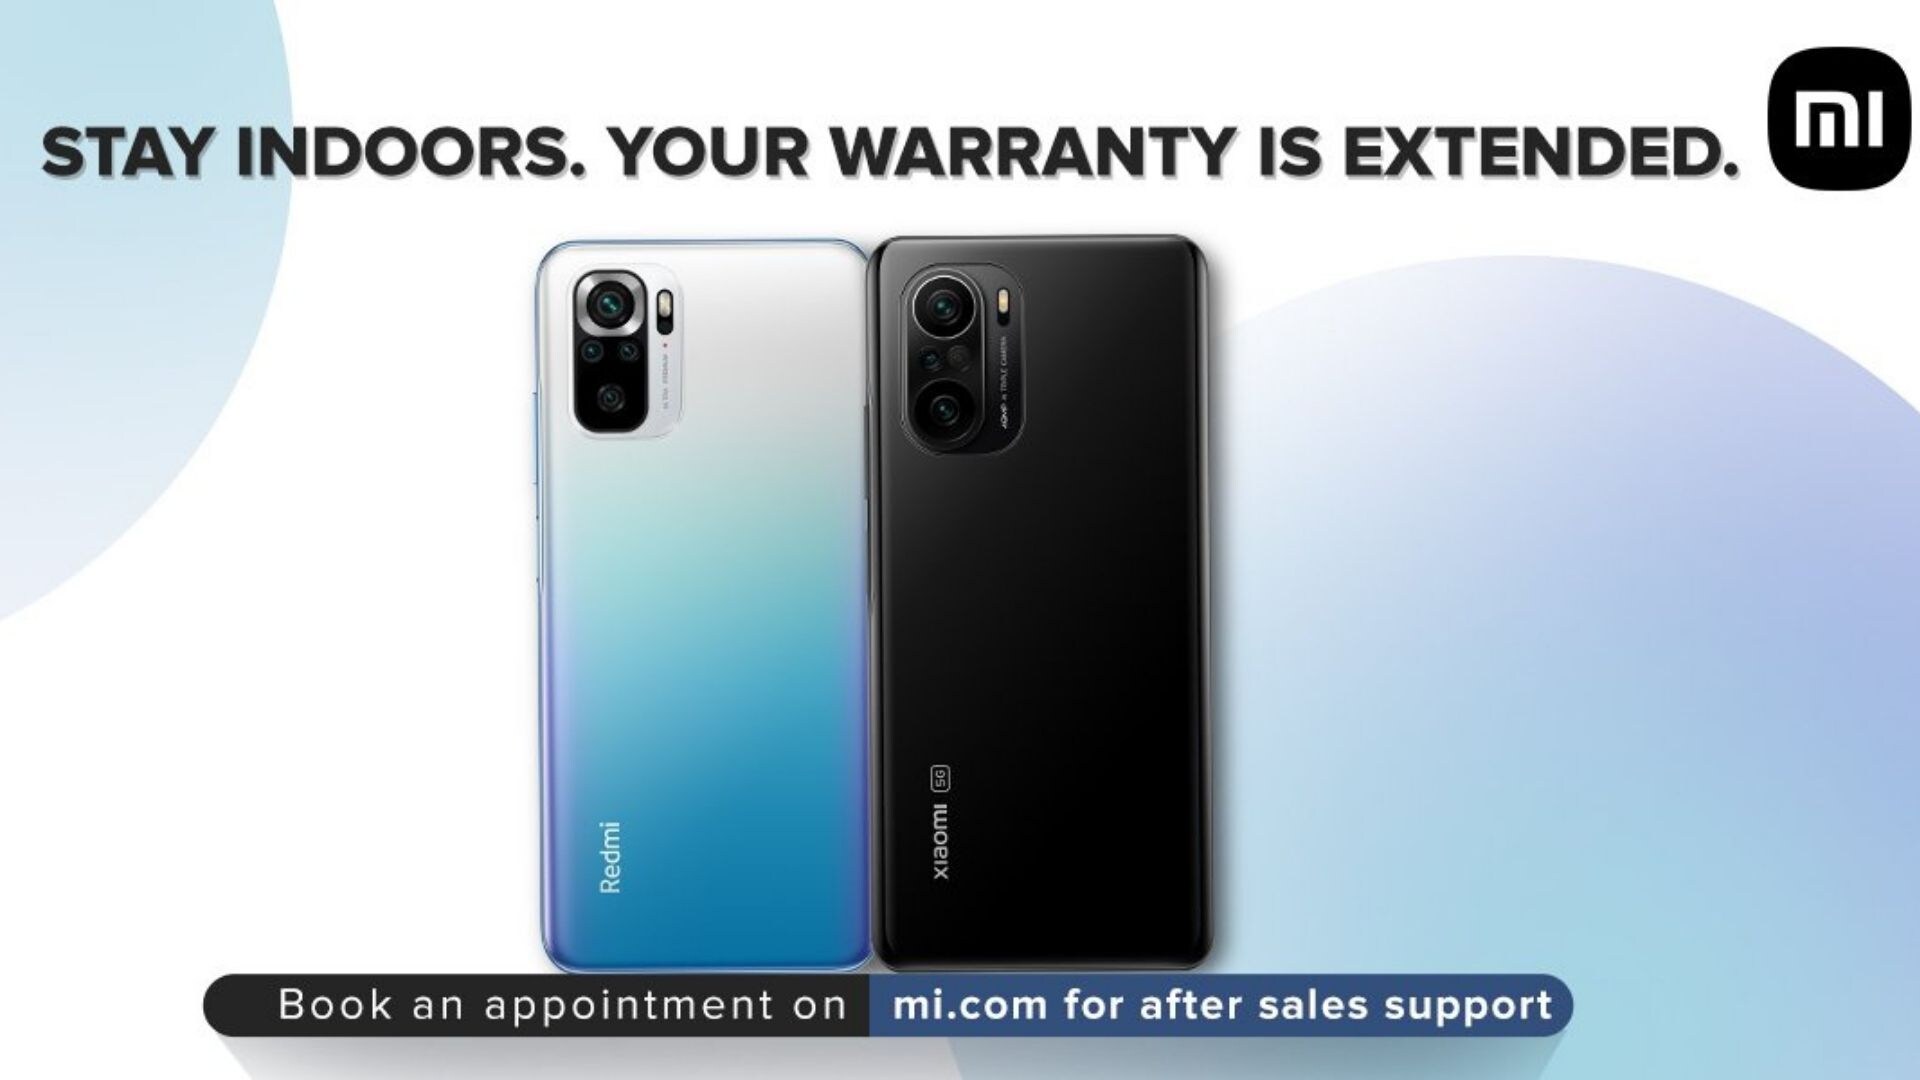 Xiaomi extends warranty of products by 2 months in India | Mobile News